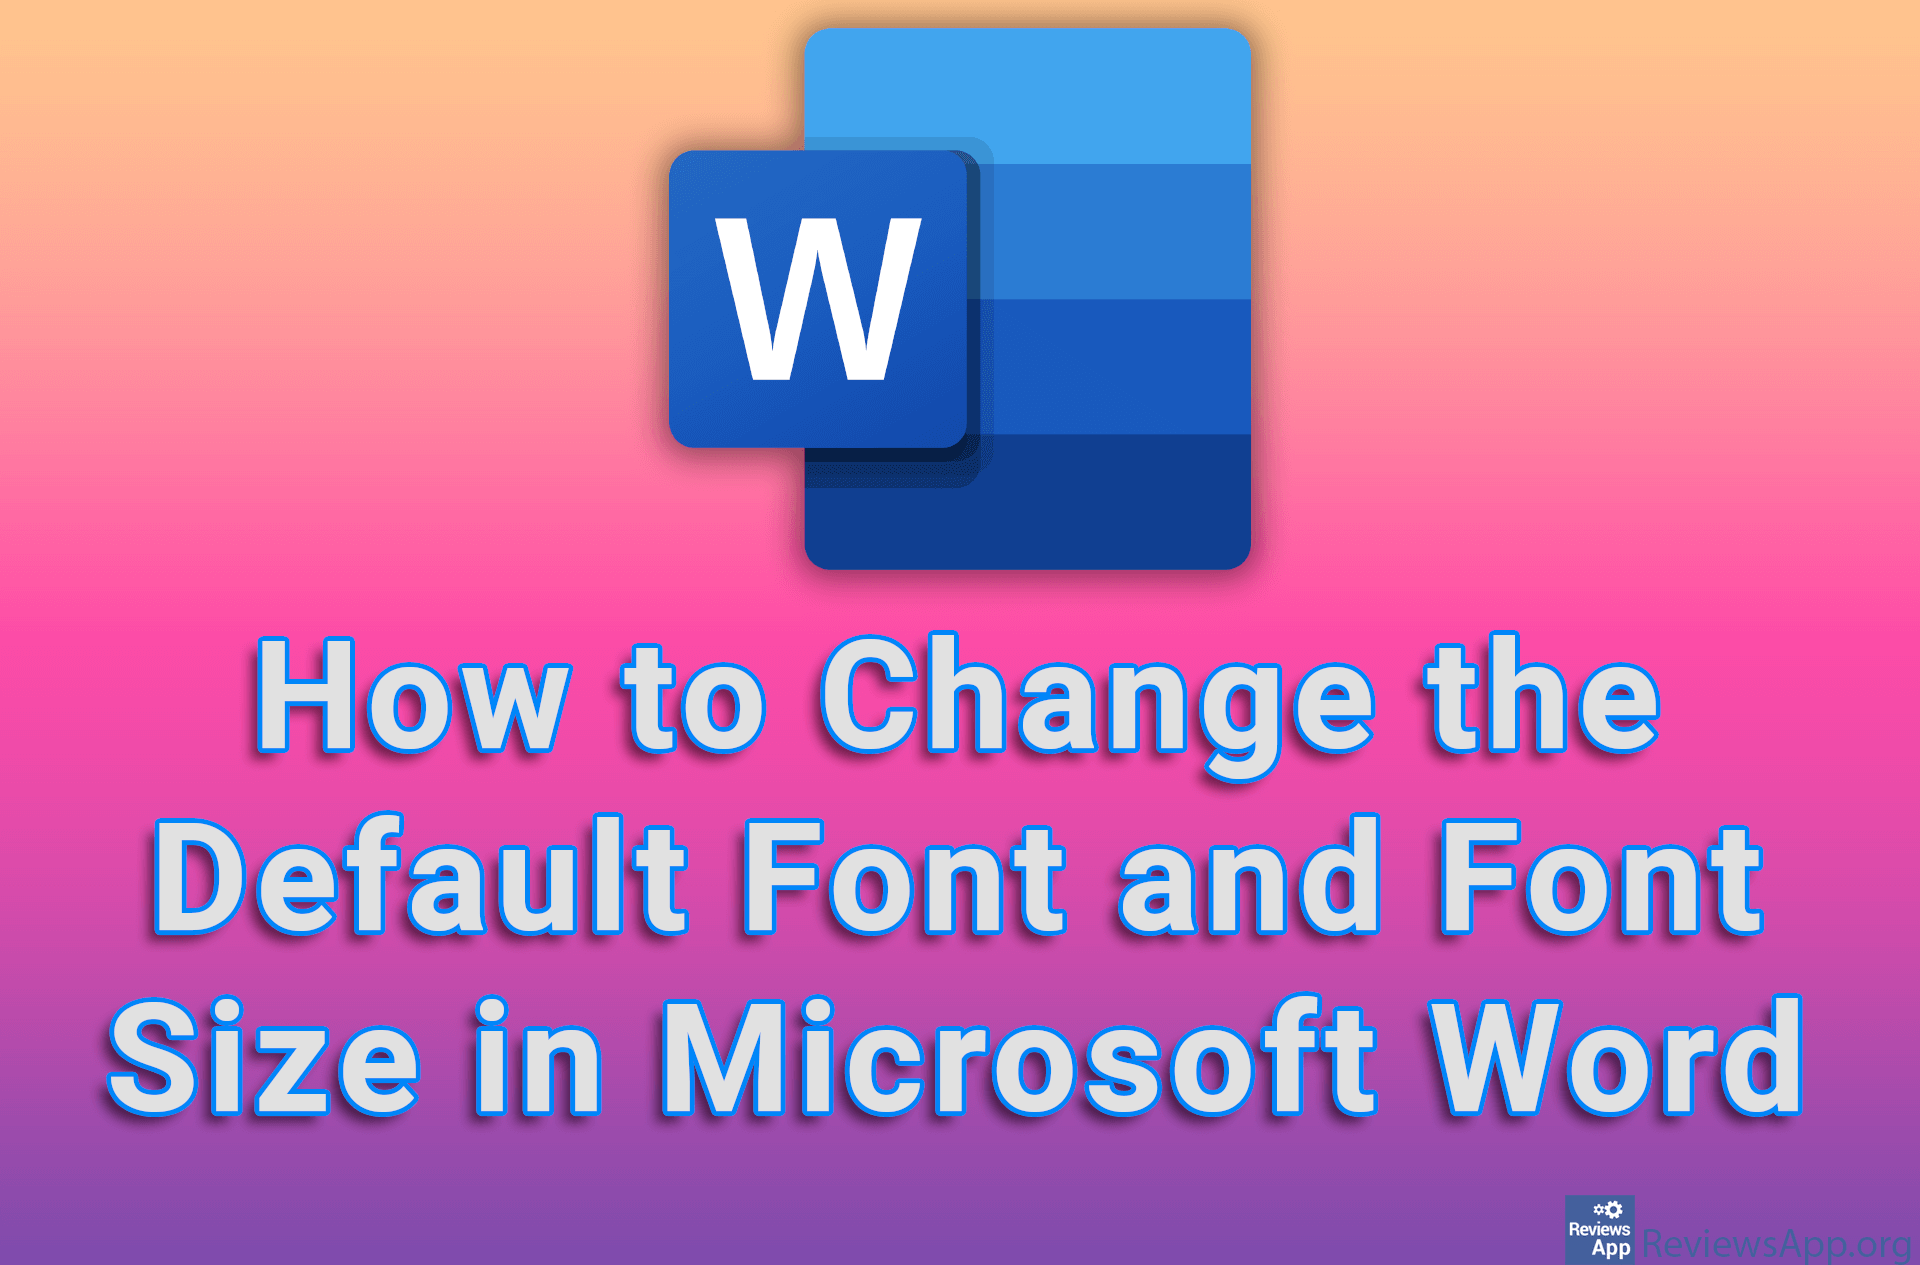 How to Change the Default Font and Font Size in Microsoft Word